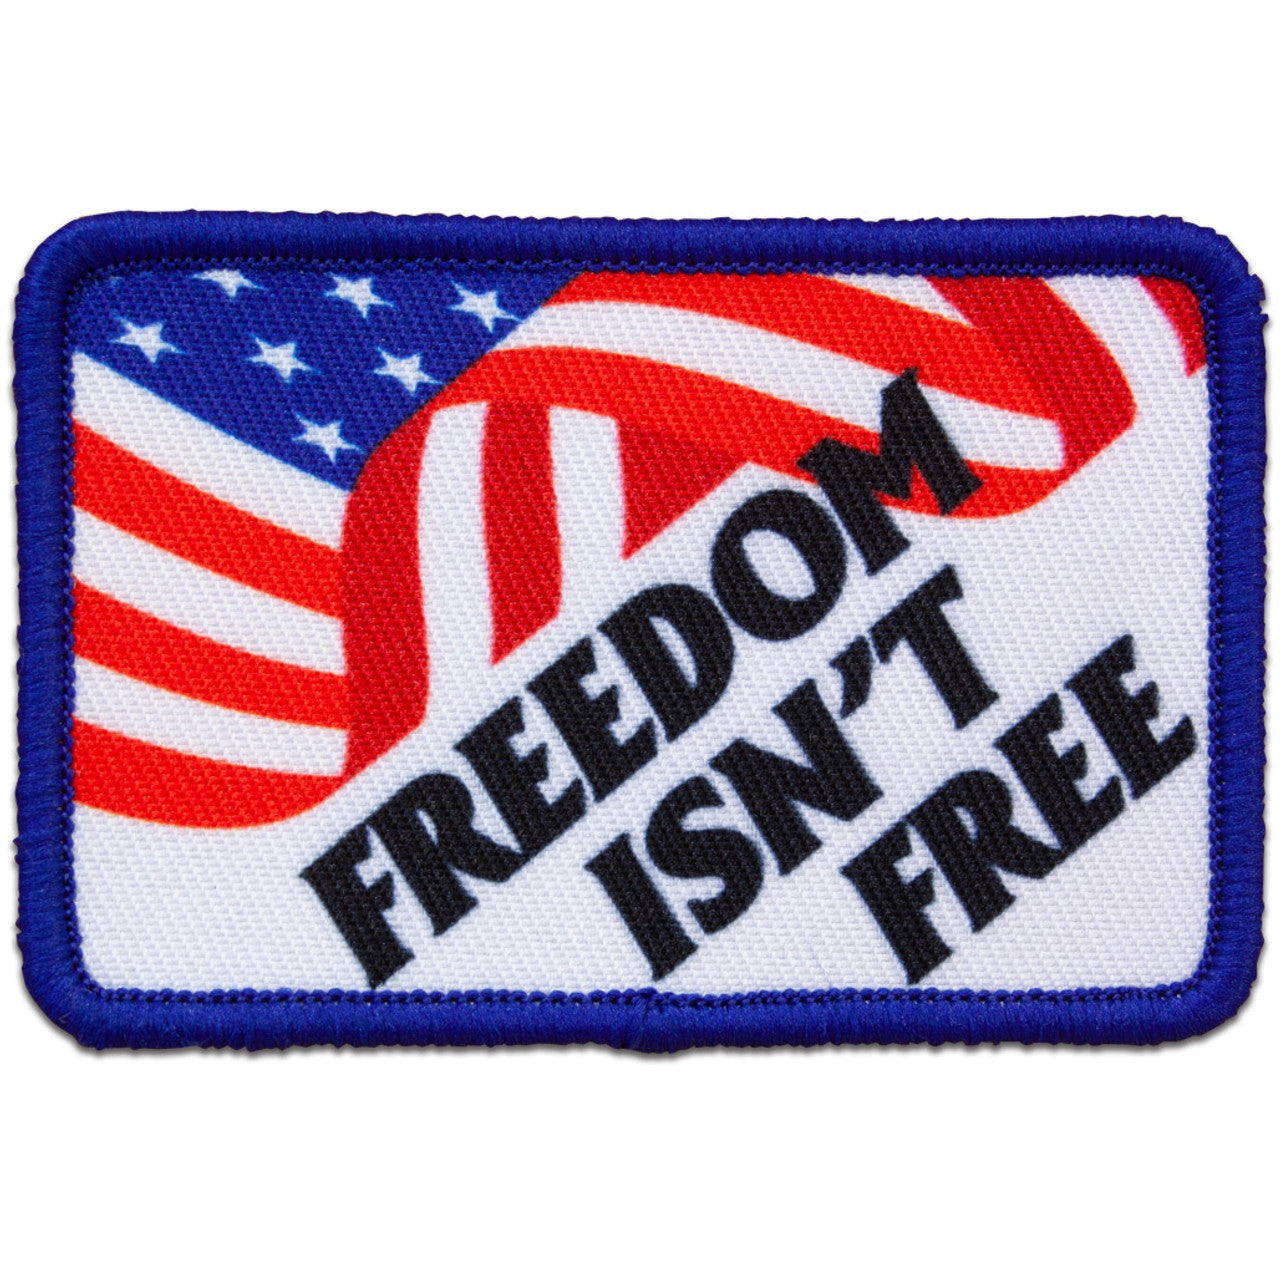 "FREEDOM ISN'T FREE" US FLAG MORALE PATCH